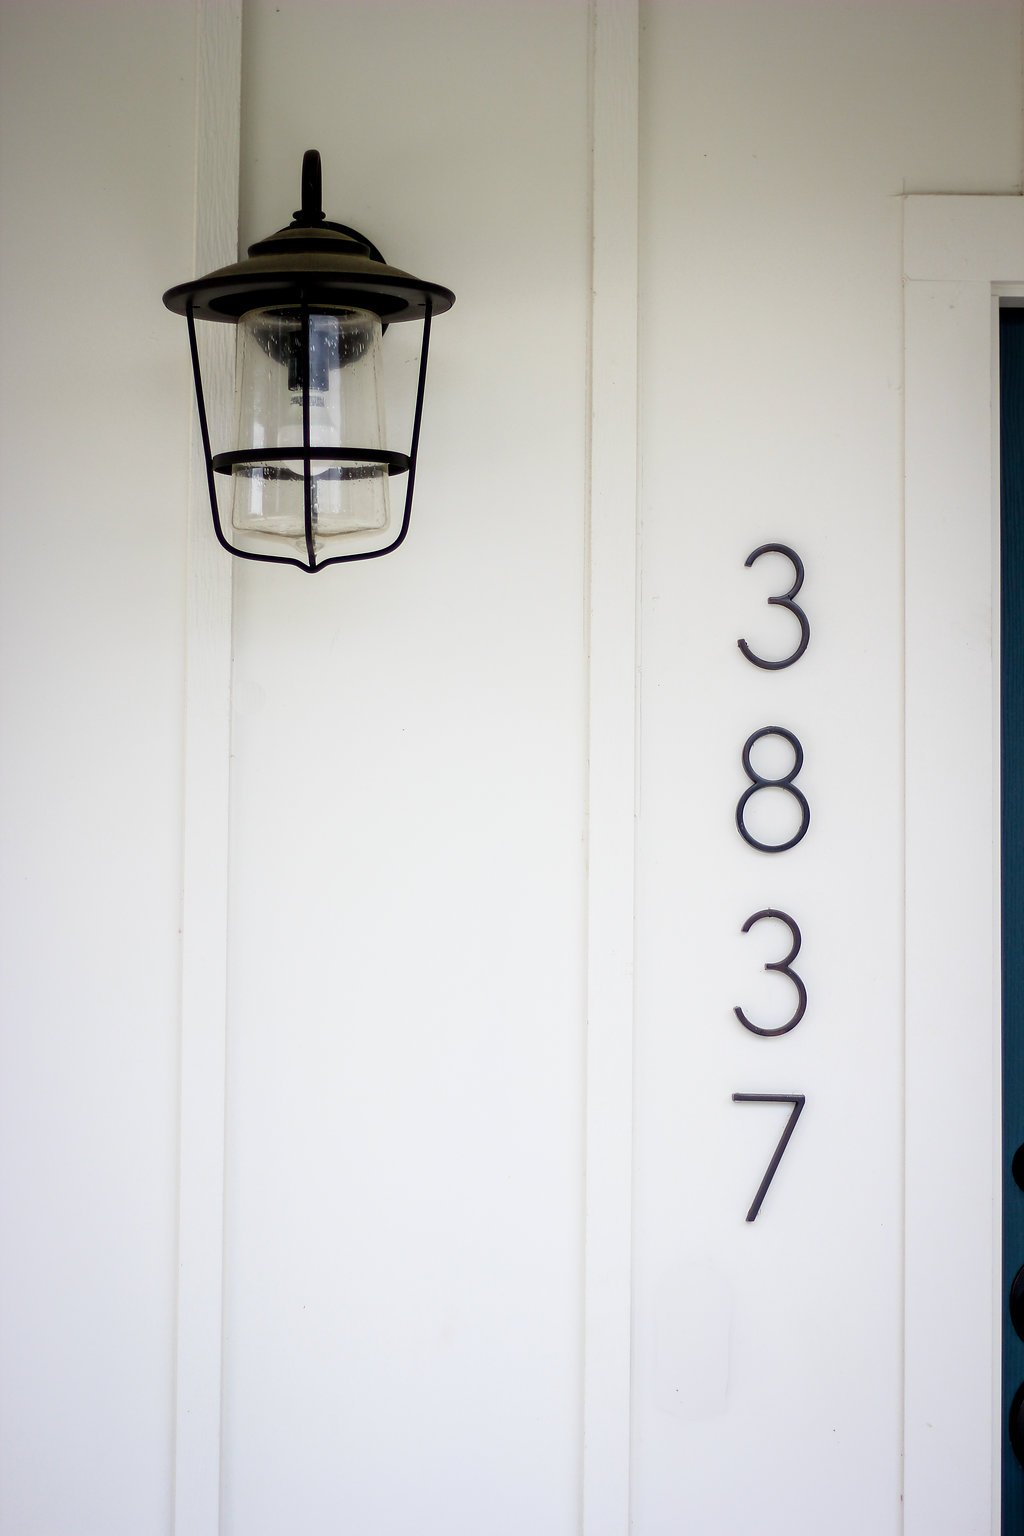 Home Design Accents: lantern and house numbers on porch